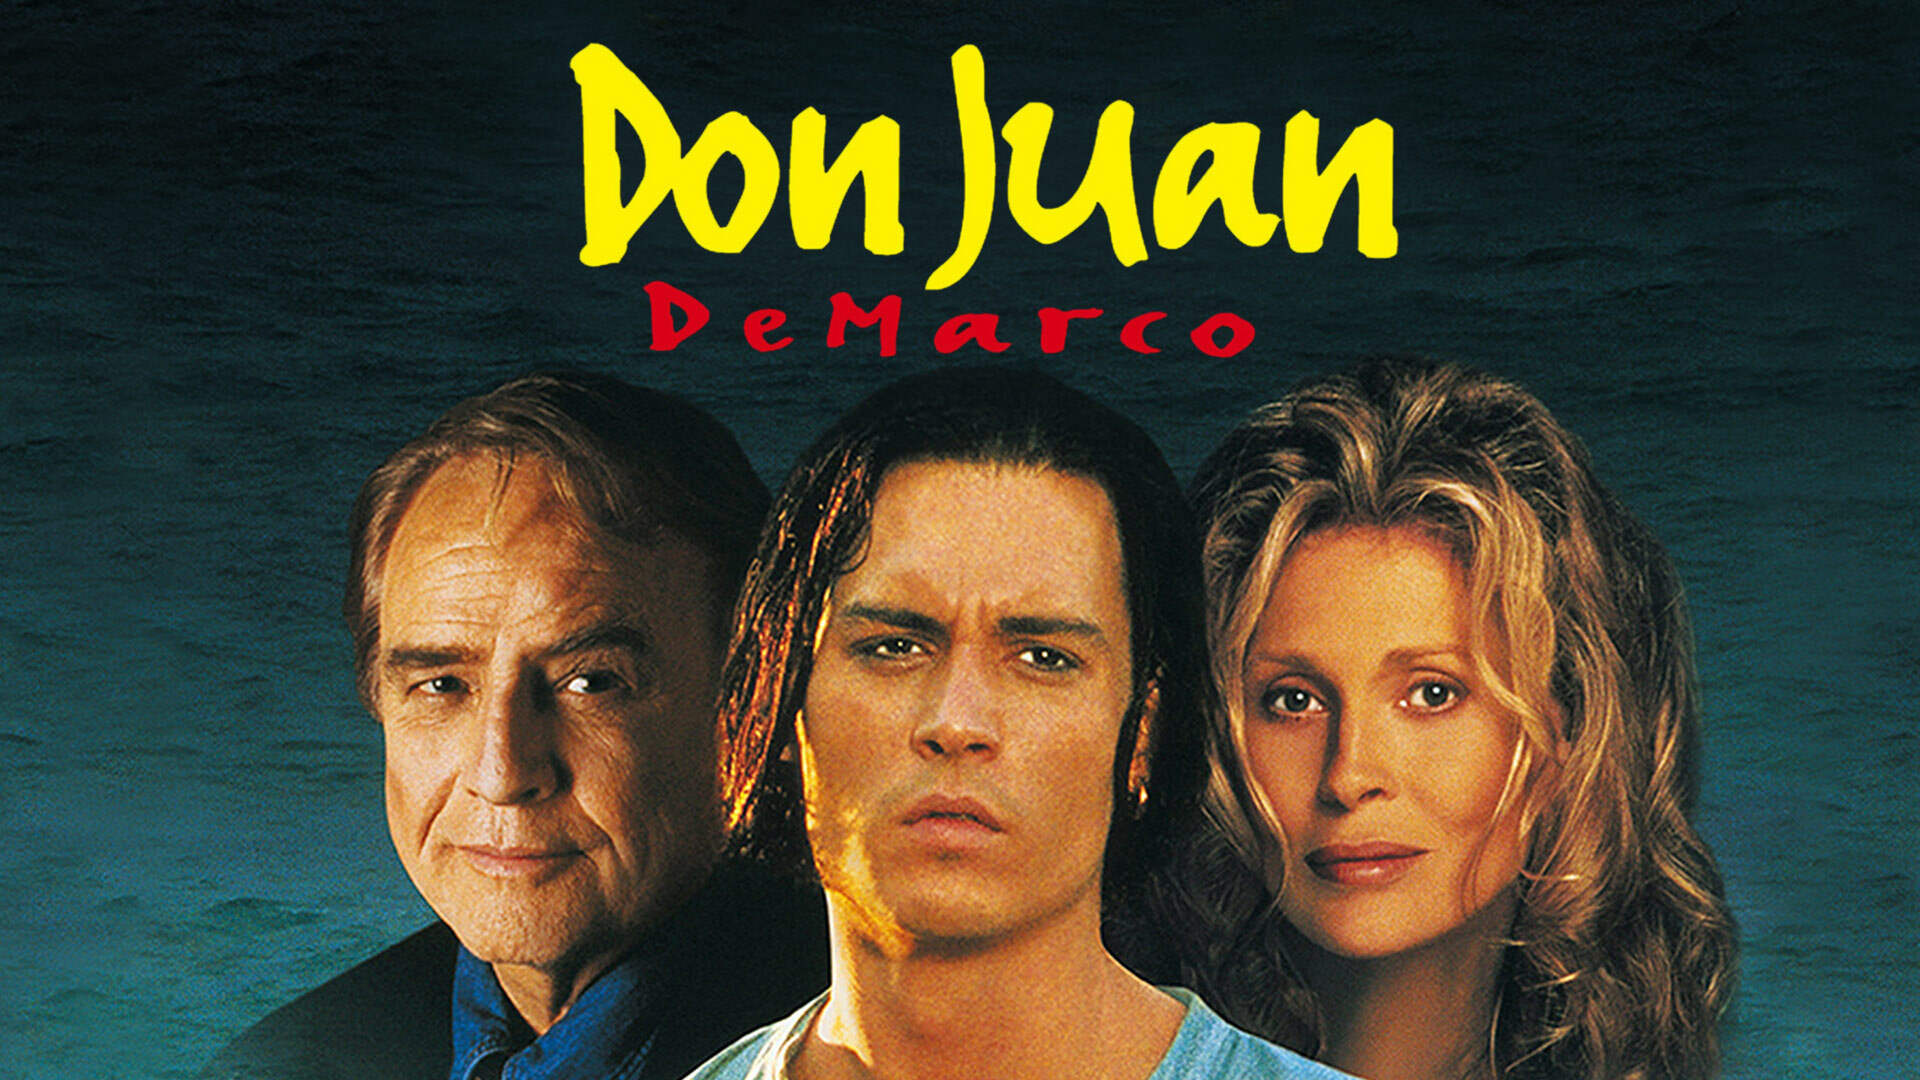 38-facts-about-the-movie-don-juan-demarco